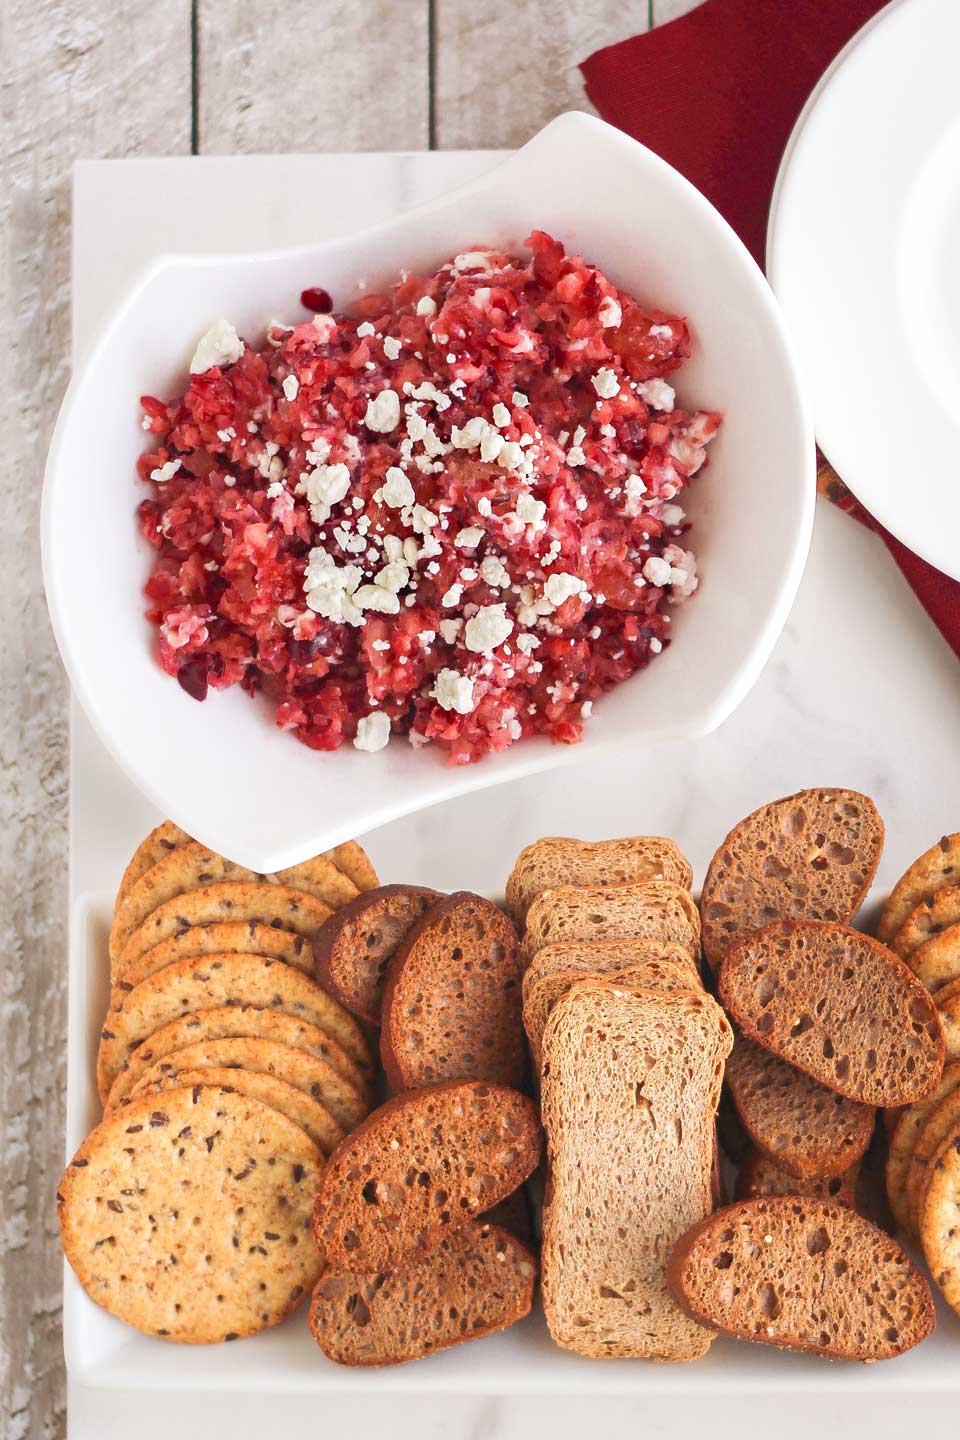 Cranberry dip presented in serving bowl, sprinkled with goat cheese, with crostini and crackers ready for dipping.